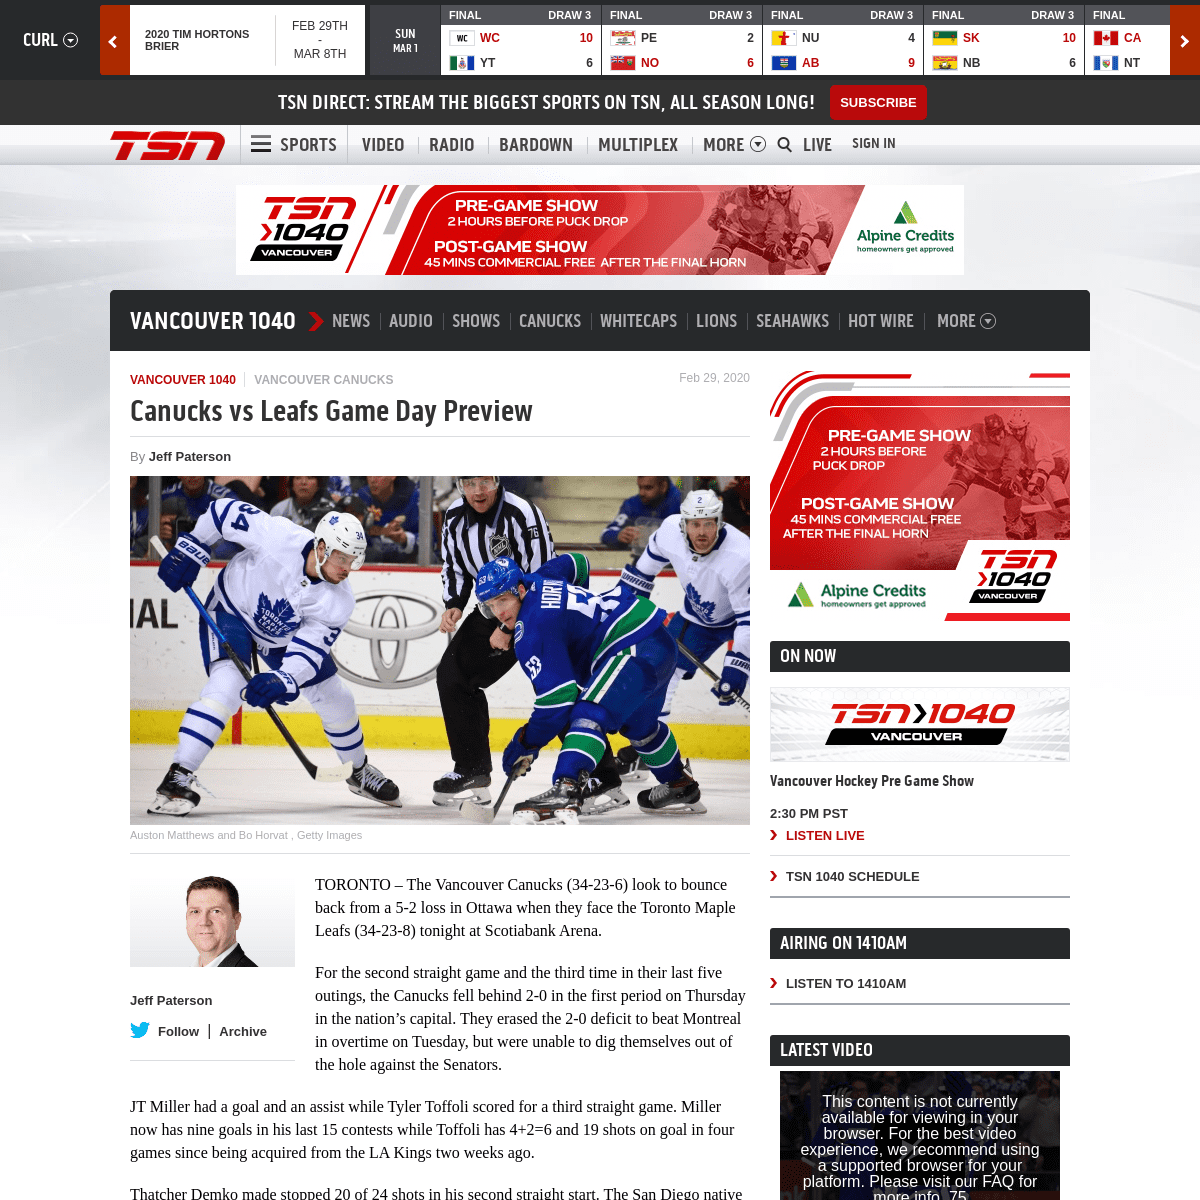 A complete backup of www.tsn.ca/canucks-vs-leafs-game-day-preview-1.1450625